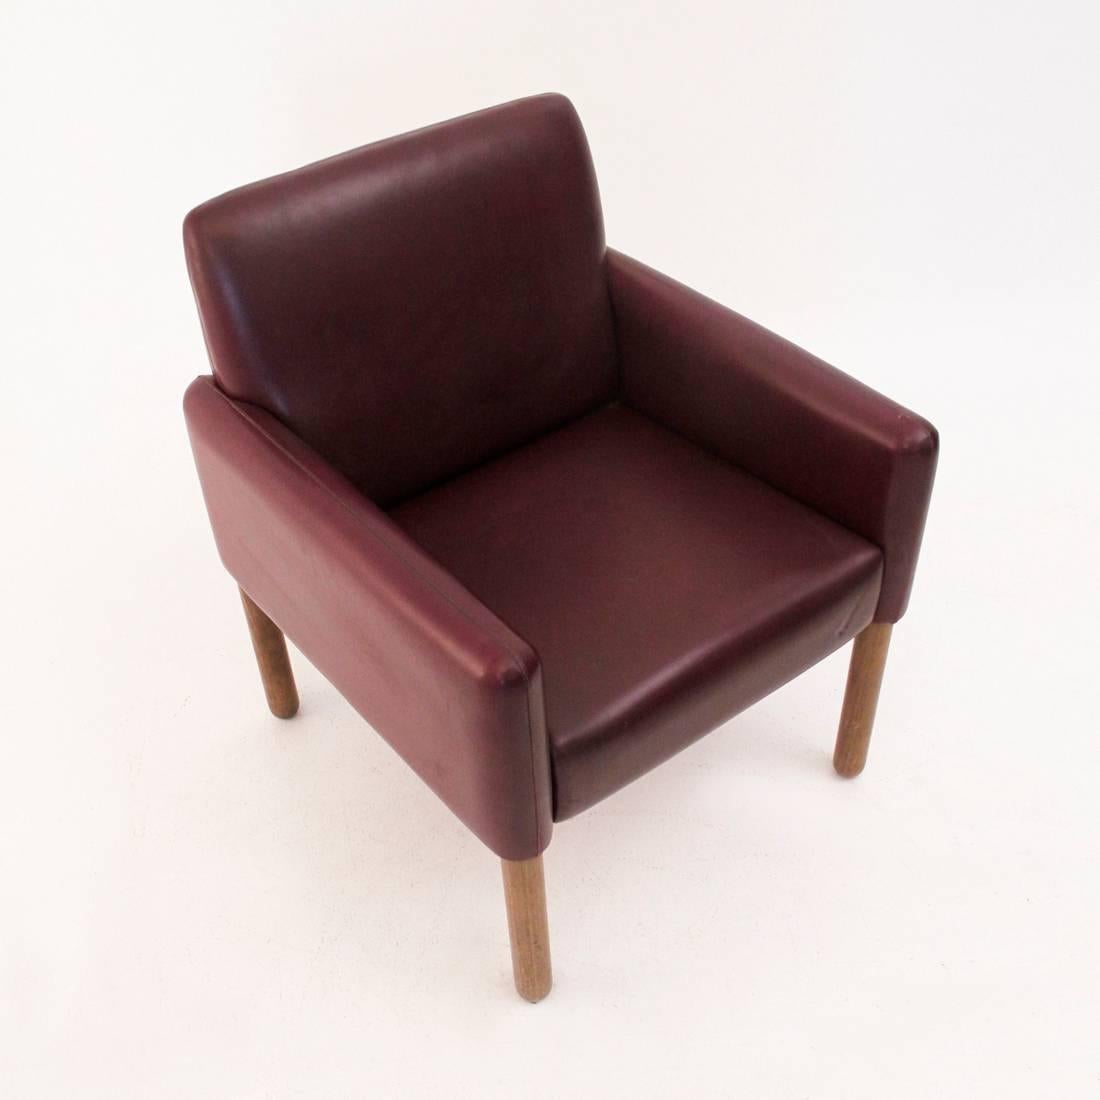 Chair designed by Vico Magistretti in 1963 and produced by Cassina.
Structure in wood padded and lined in faux leather burgundy.
wooden legs lathed round.
Structure in good condition, cushioning to be reviewed, signs of use visible in the